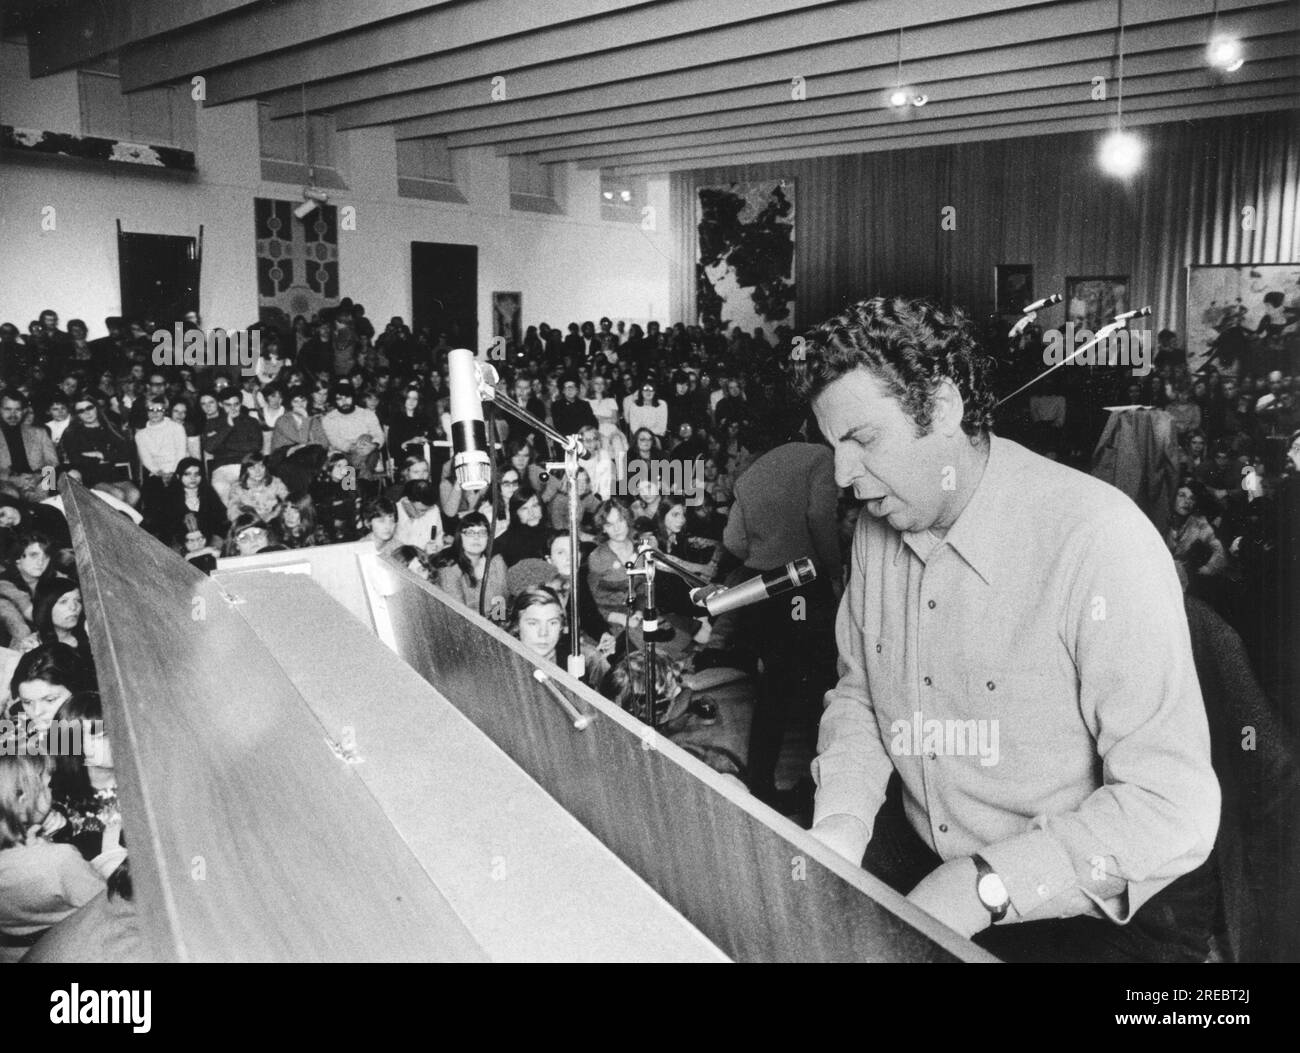 Theodorakis, Mikis, 29.7.1925 - 2,9.2021, compositore e politico greco, concerto a Stoccolma, ADDITIONAL-RIGHTS-CLEARANCE-INFO-NOT-AVAILABLE Foto Stock